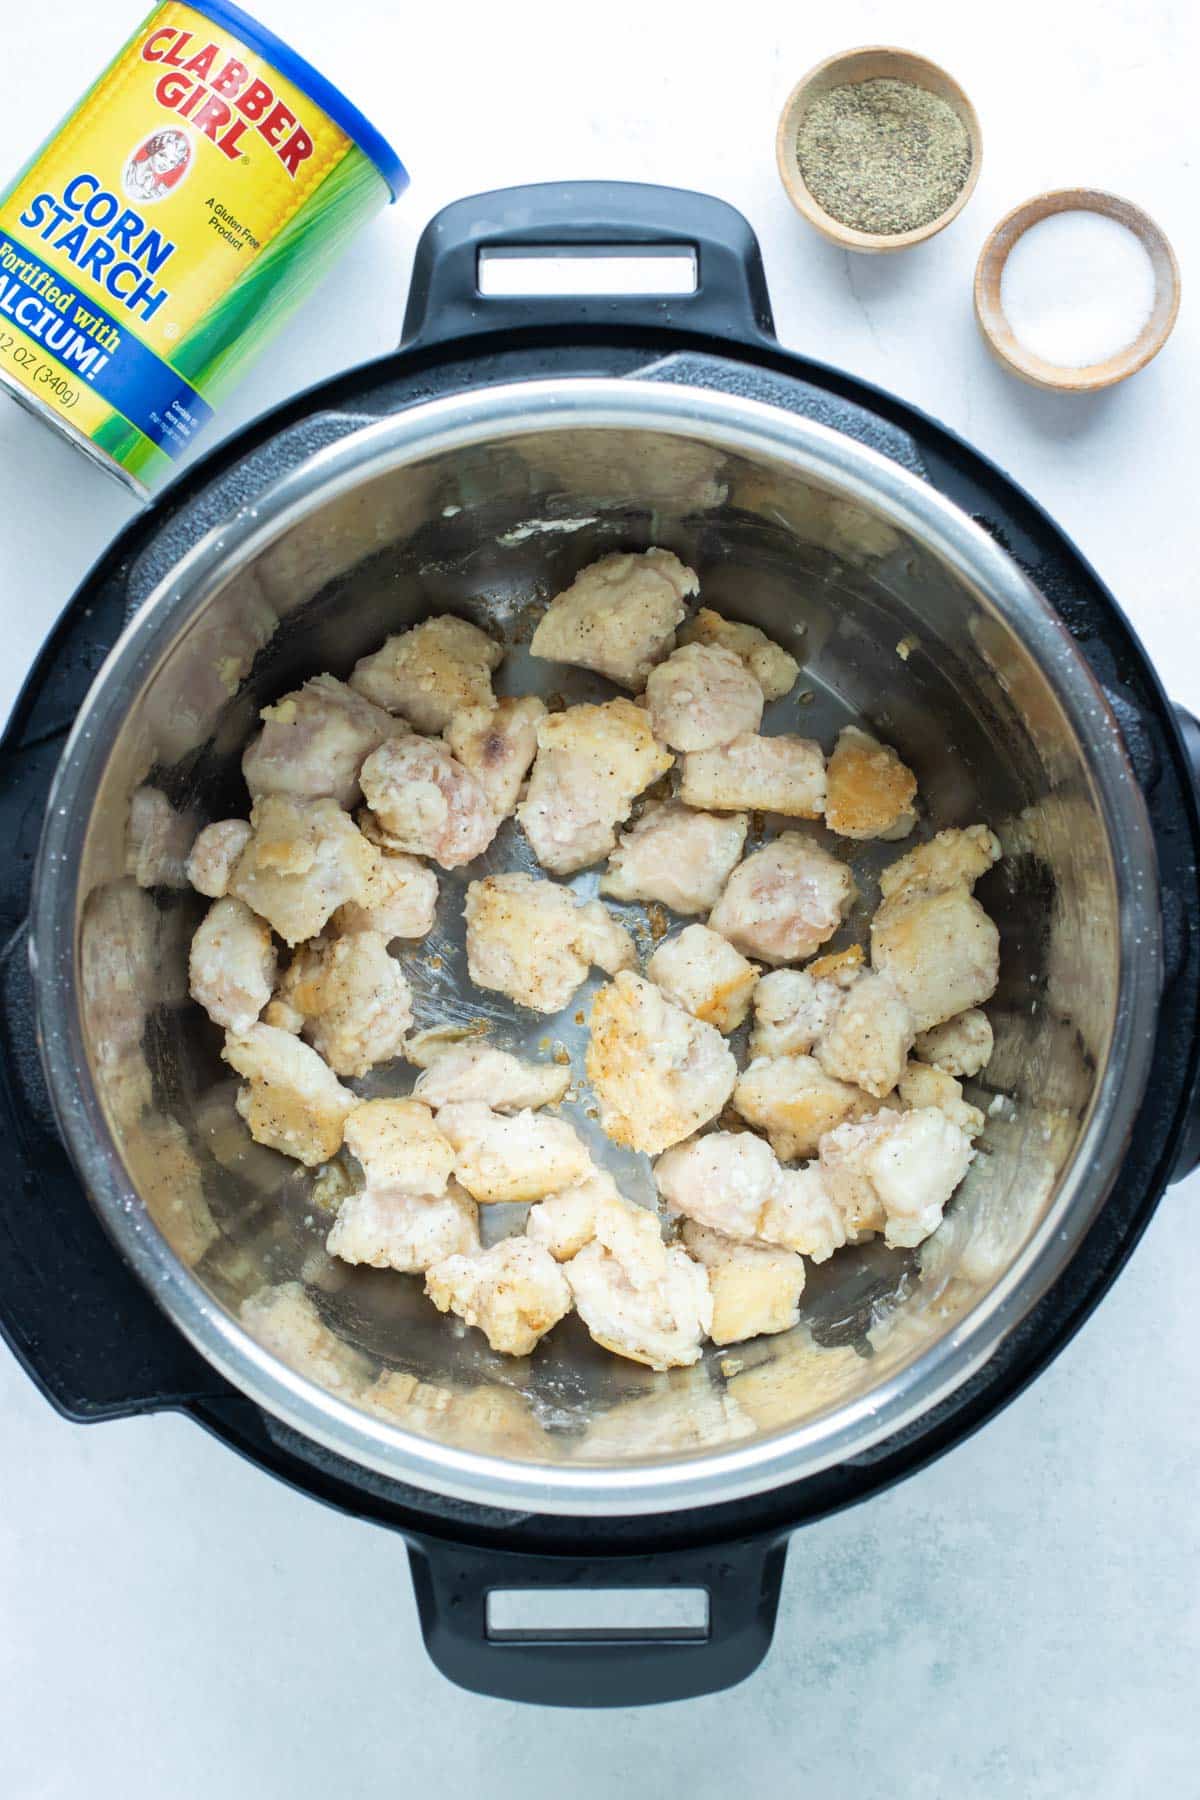 Cubed chicken is added to an instant pot.